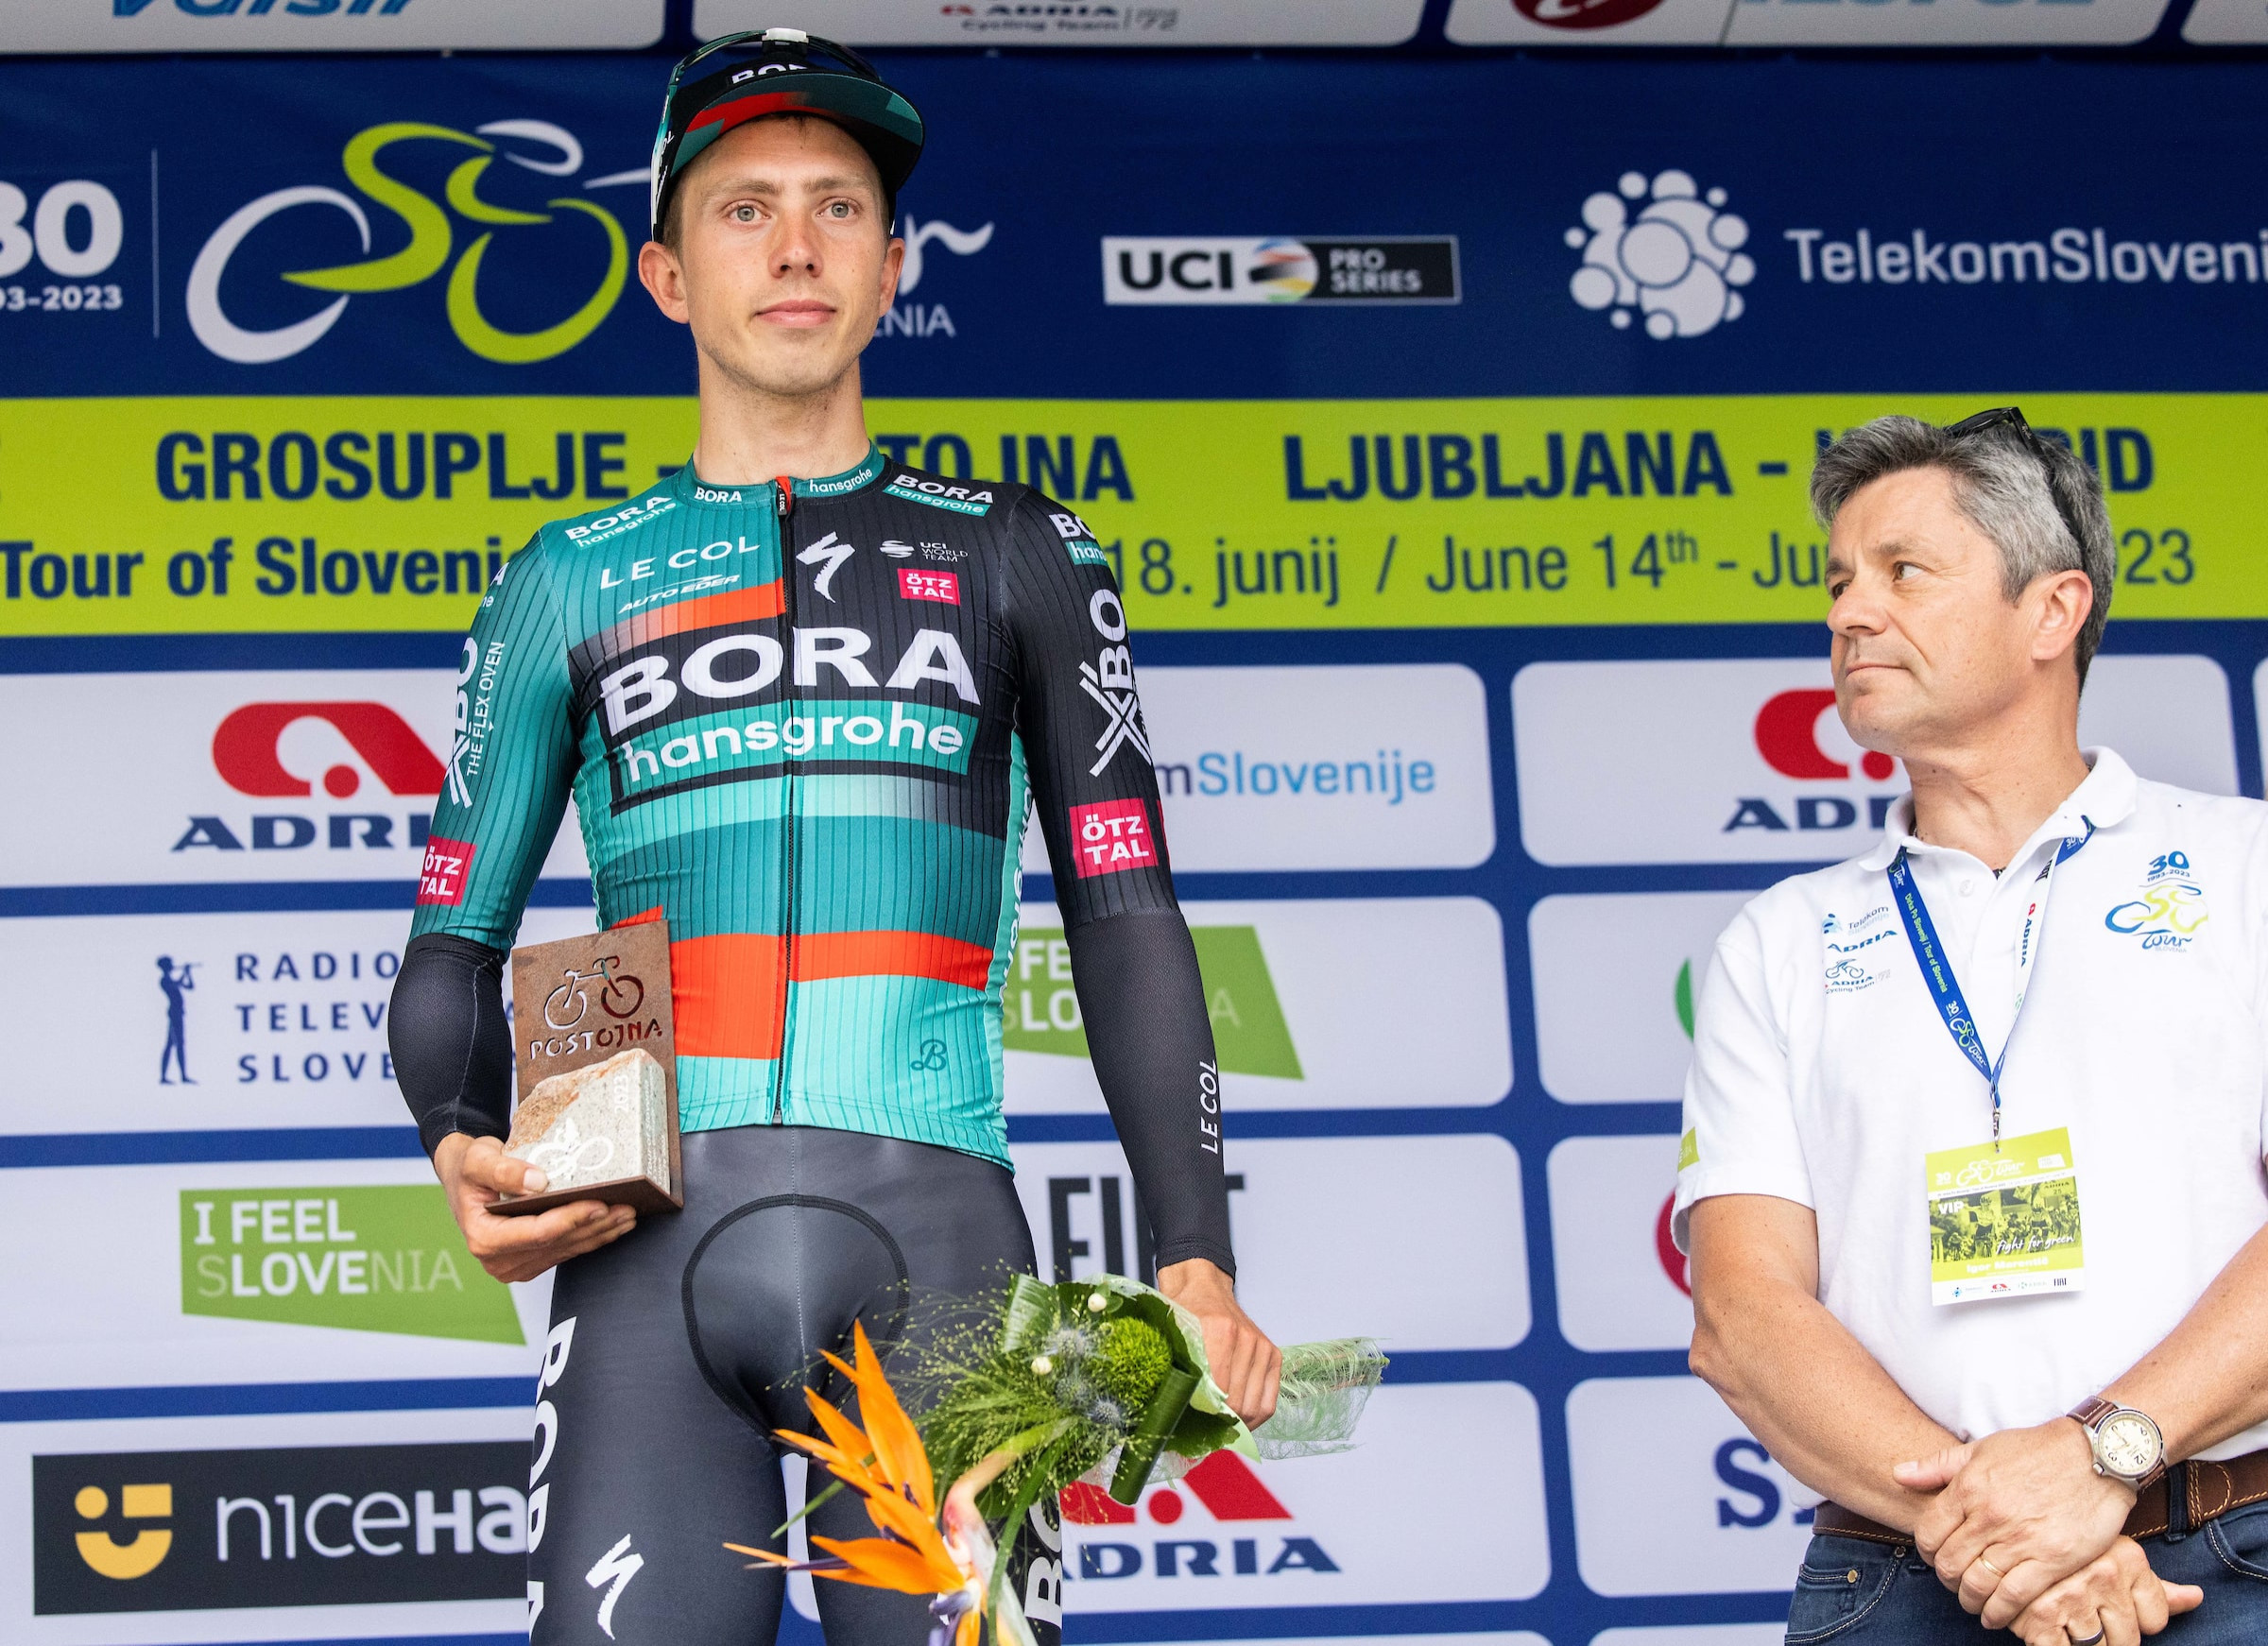 Schelling takes a surprising victory in Postojna 